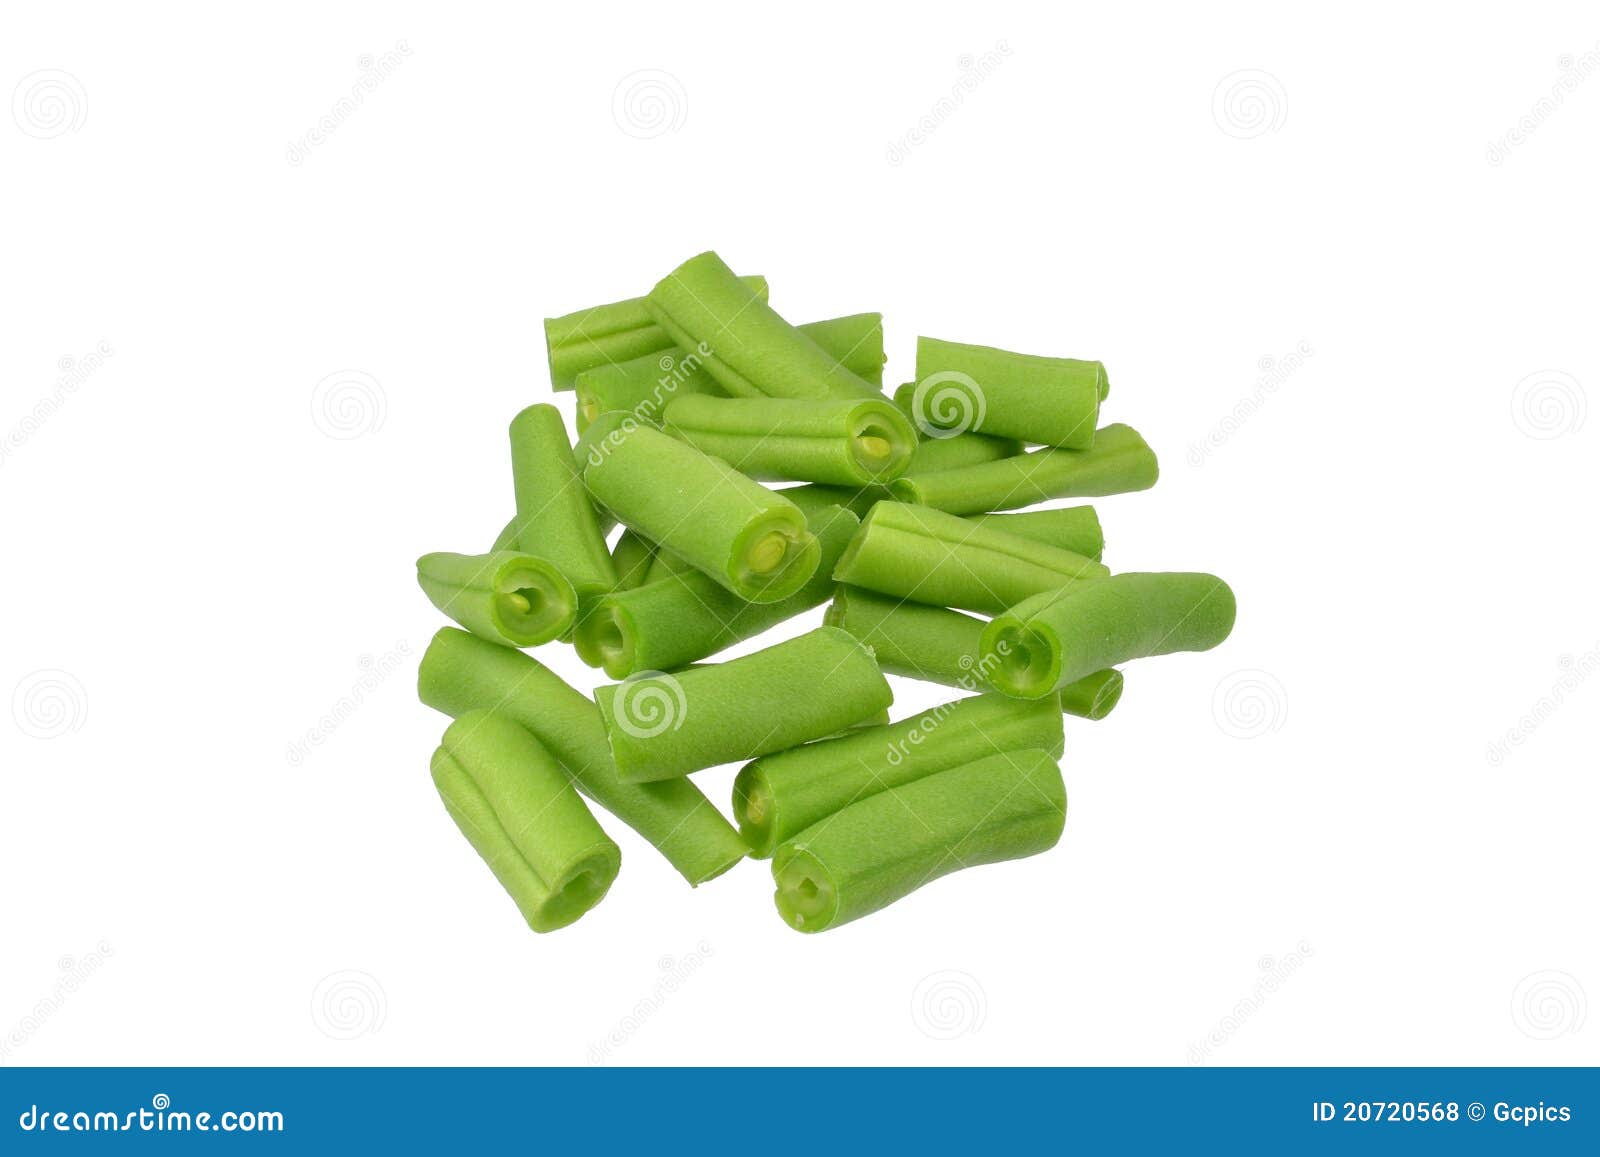 clipart of green beans - photo #23